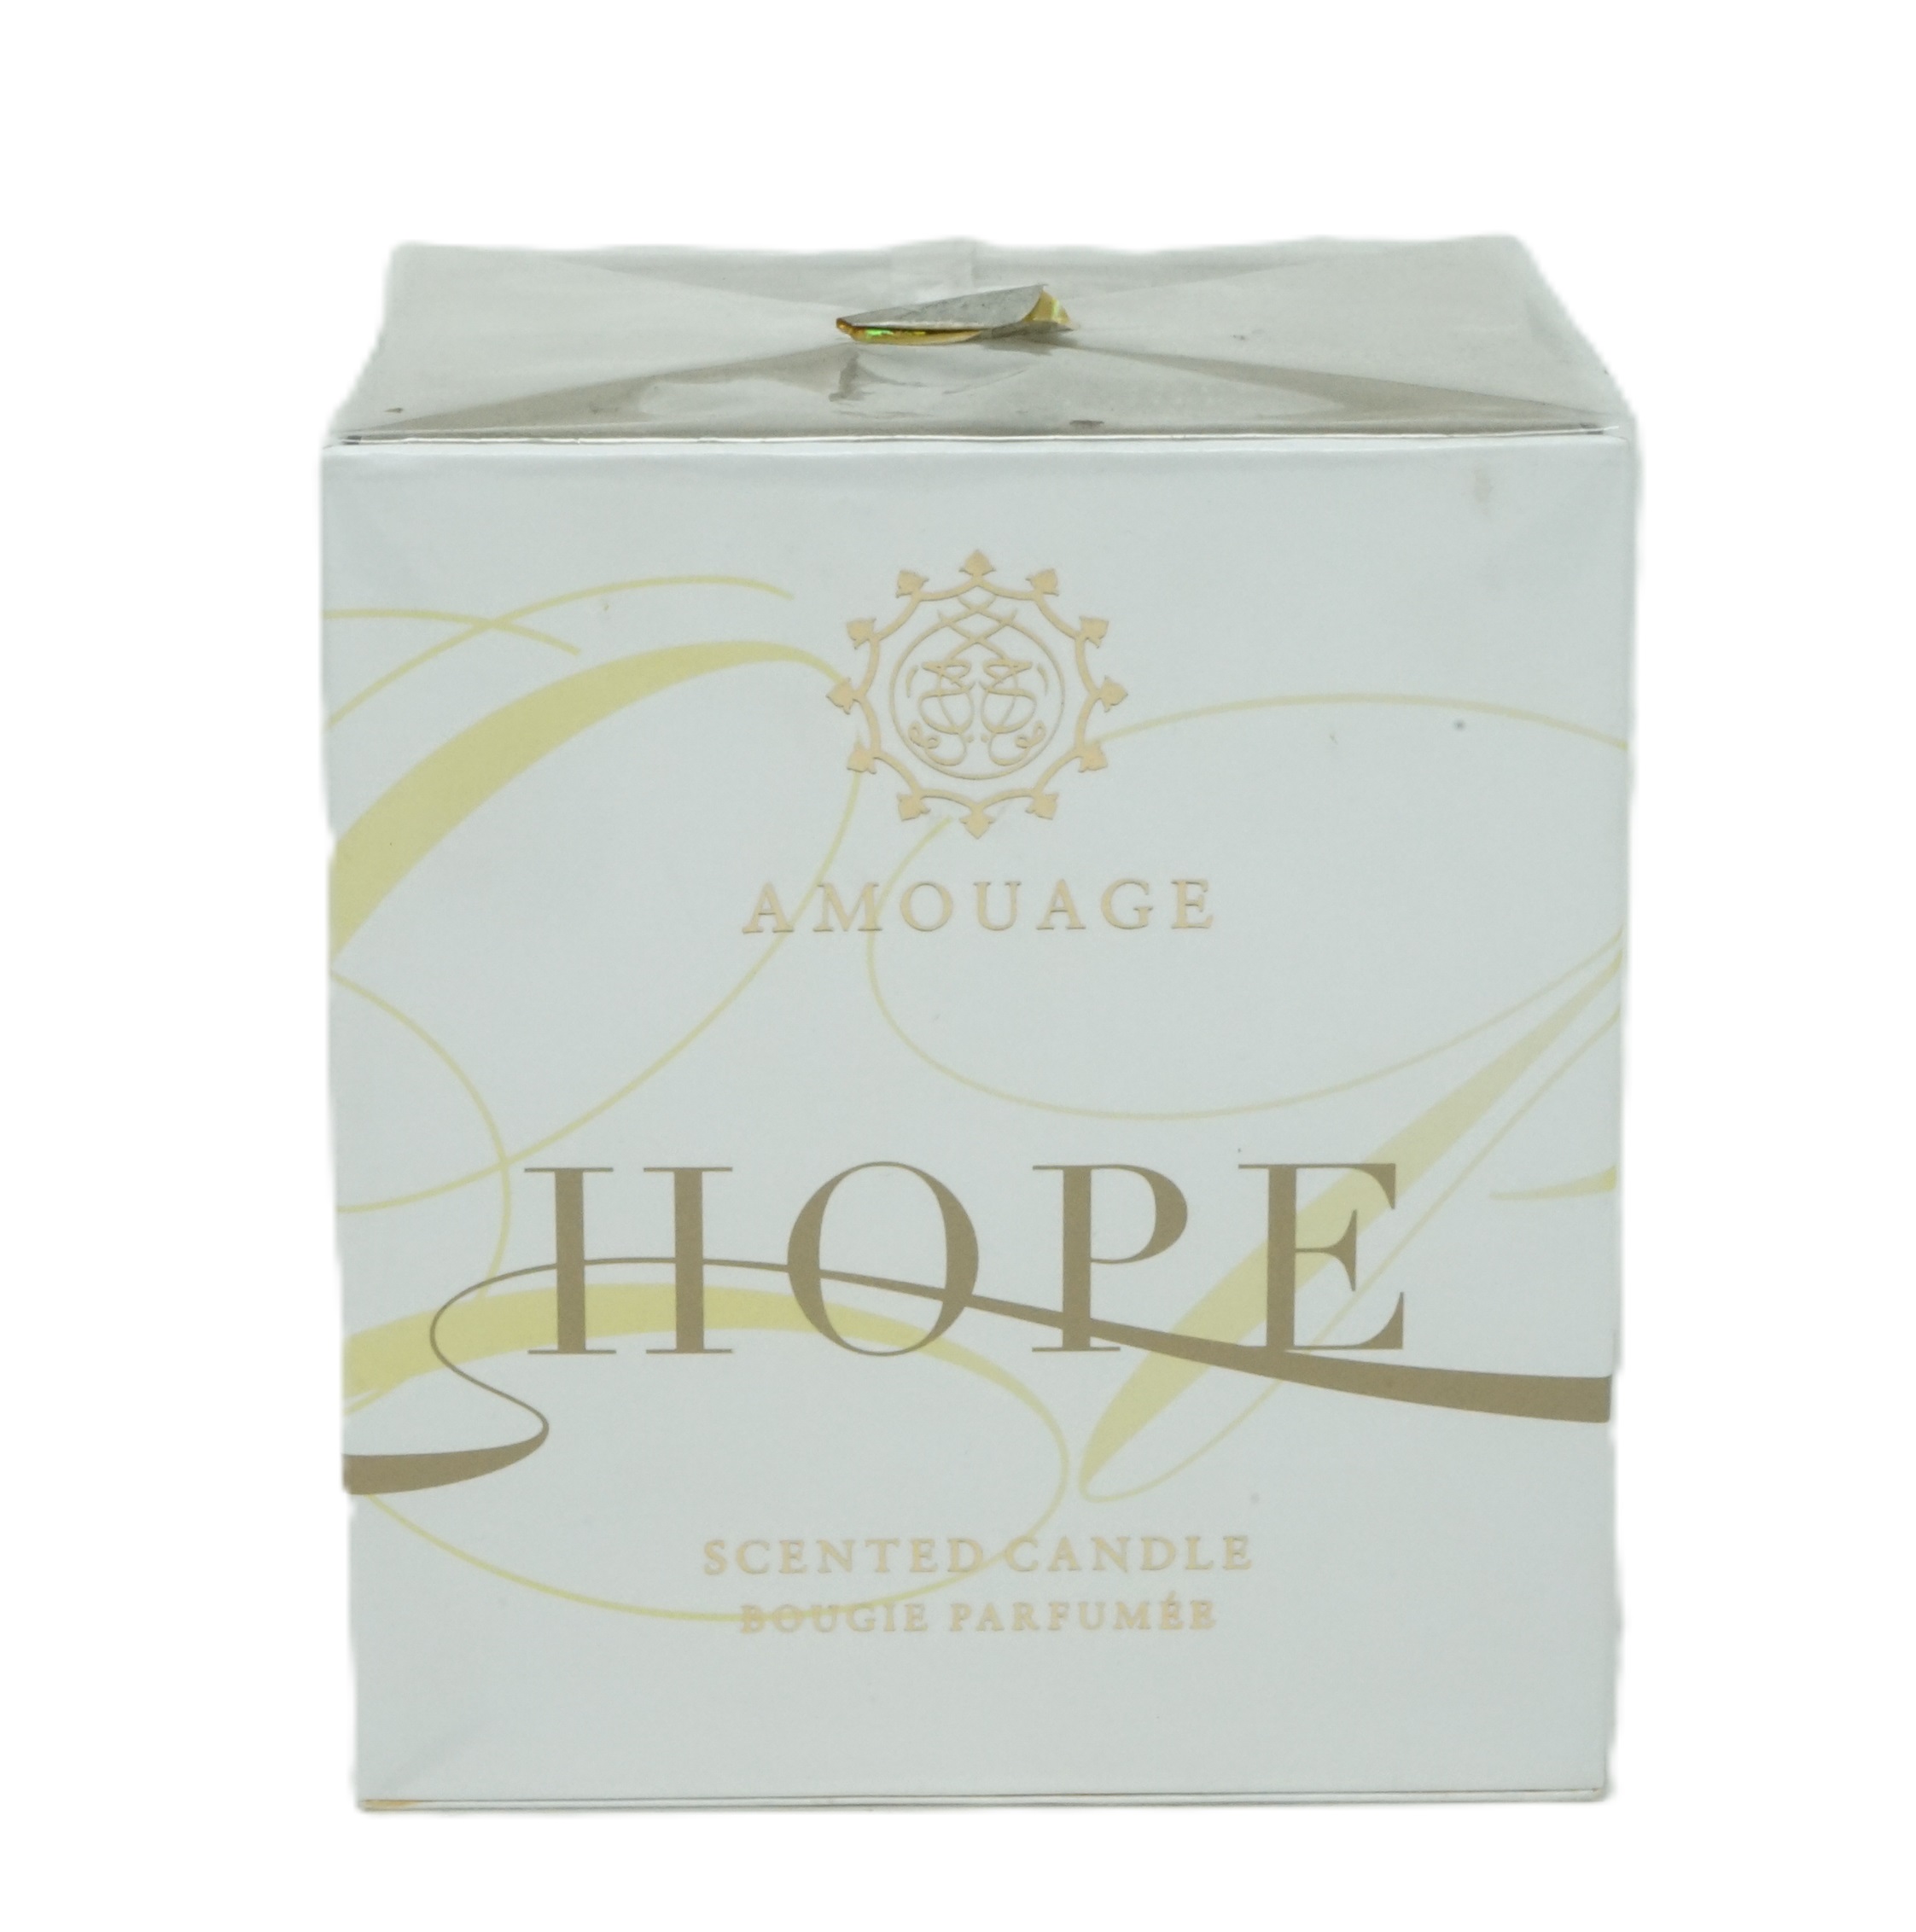 Amouage Hope Scented Candle 195g